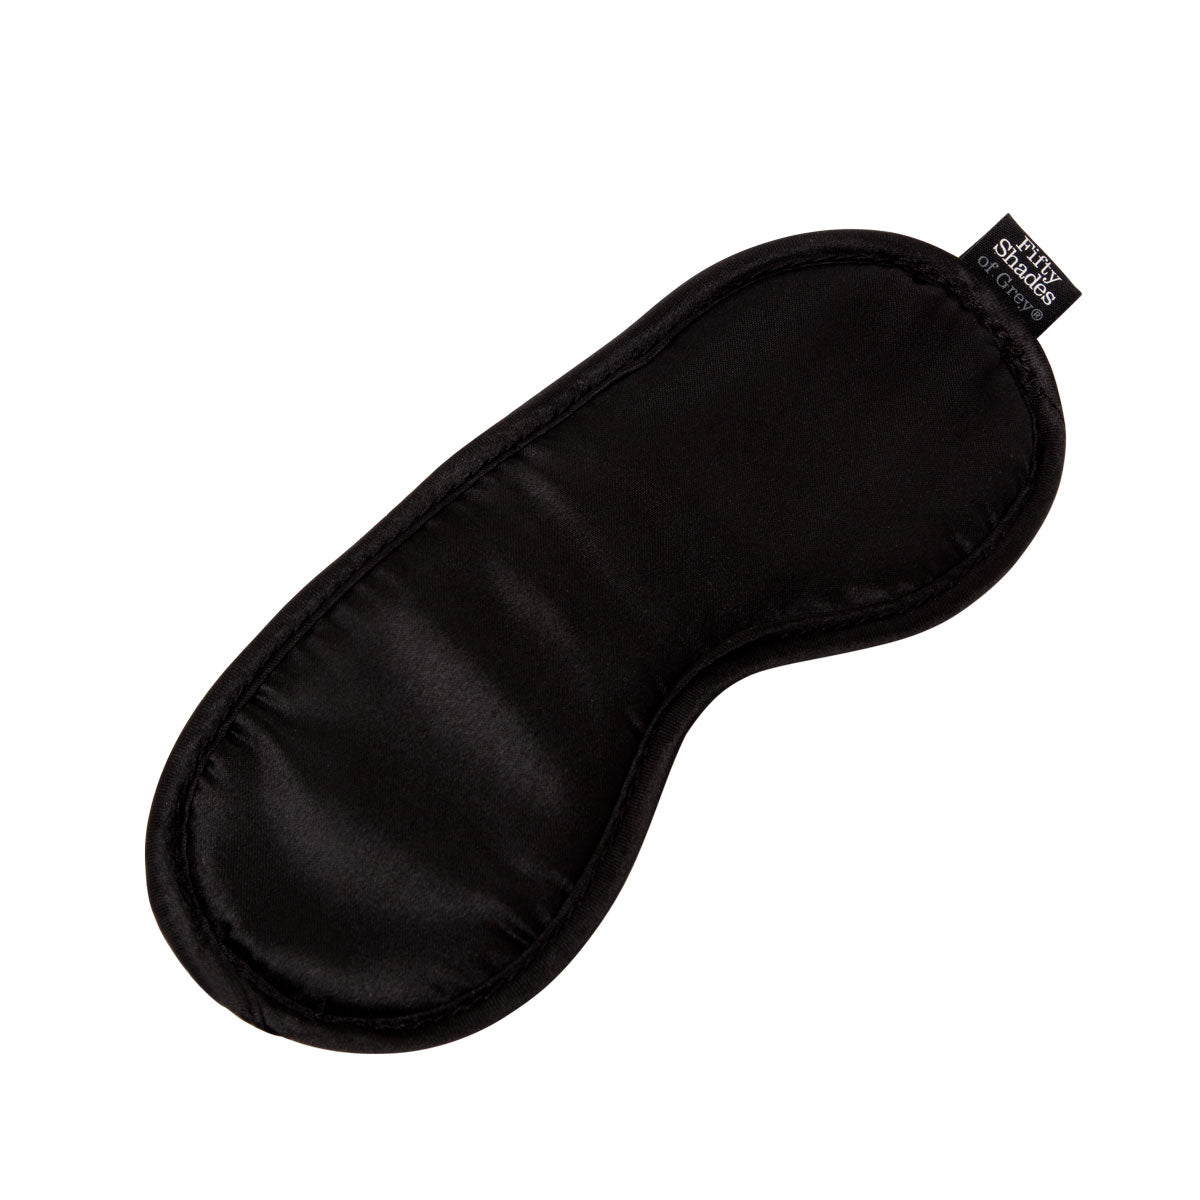 Fifty Shades of Grey® x We-Vibe – Come to Bed Couple’s Kit